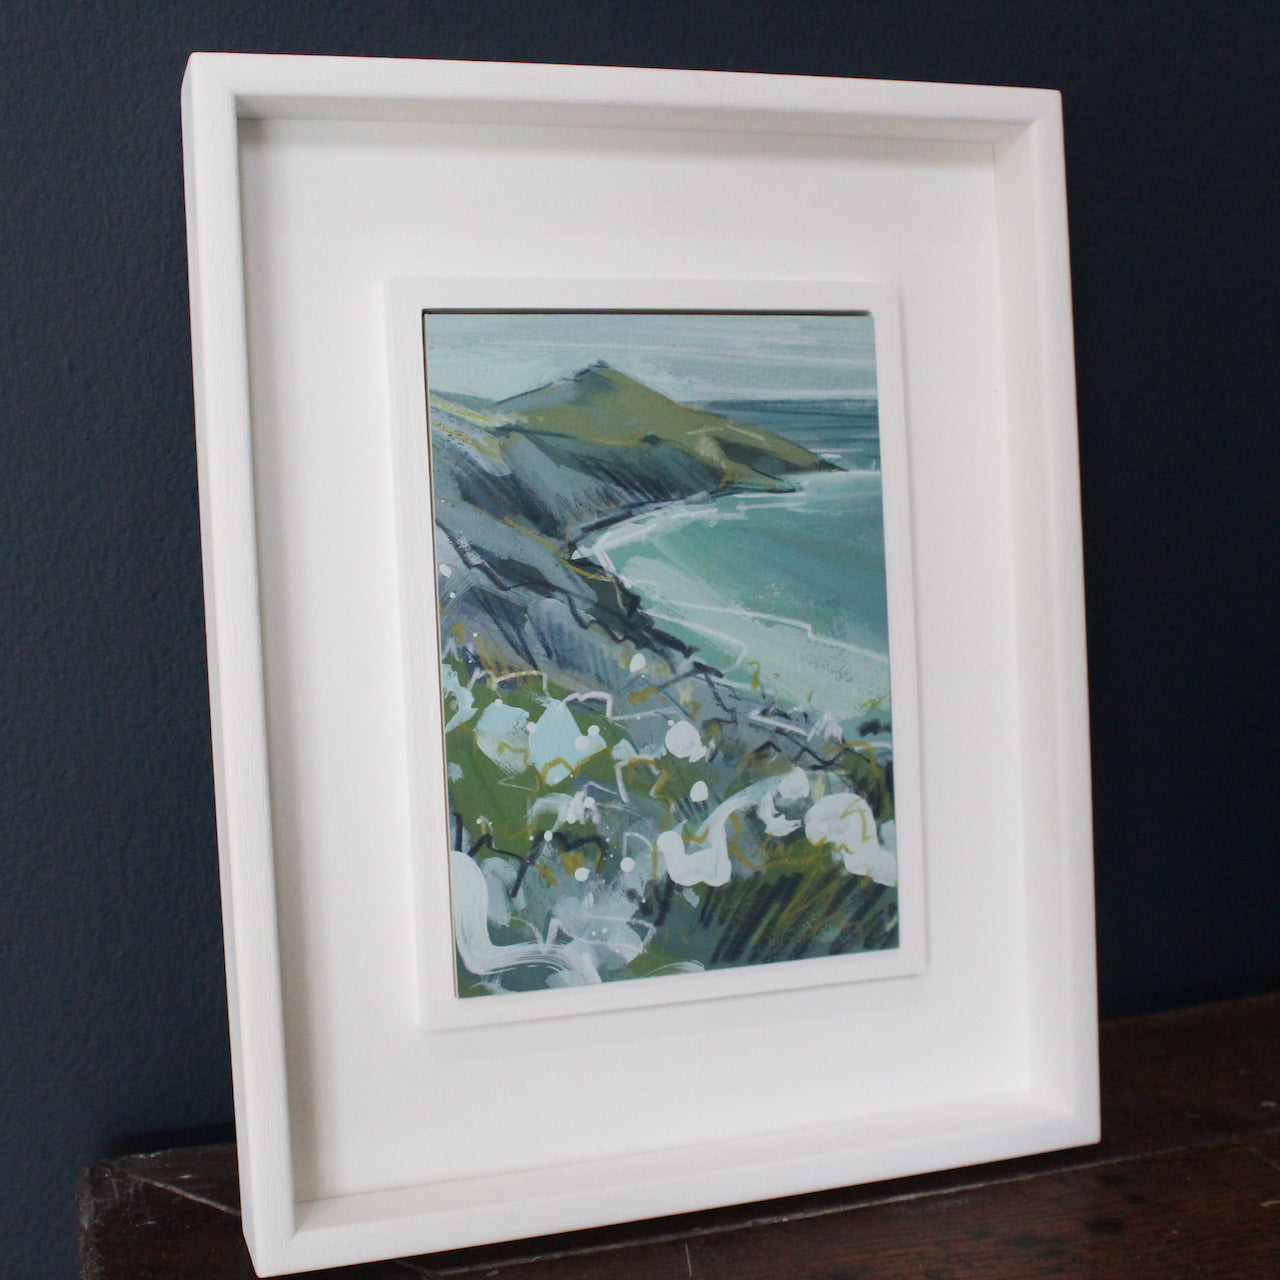 Imogen Bone, Cornish artist. Small painting, the sea is green with hints of white, the peninsula greys, ochre and white flowers